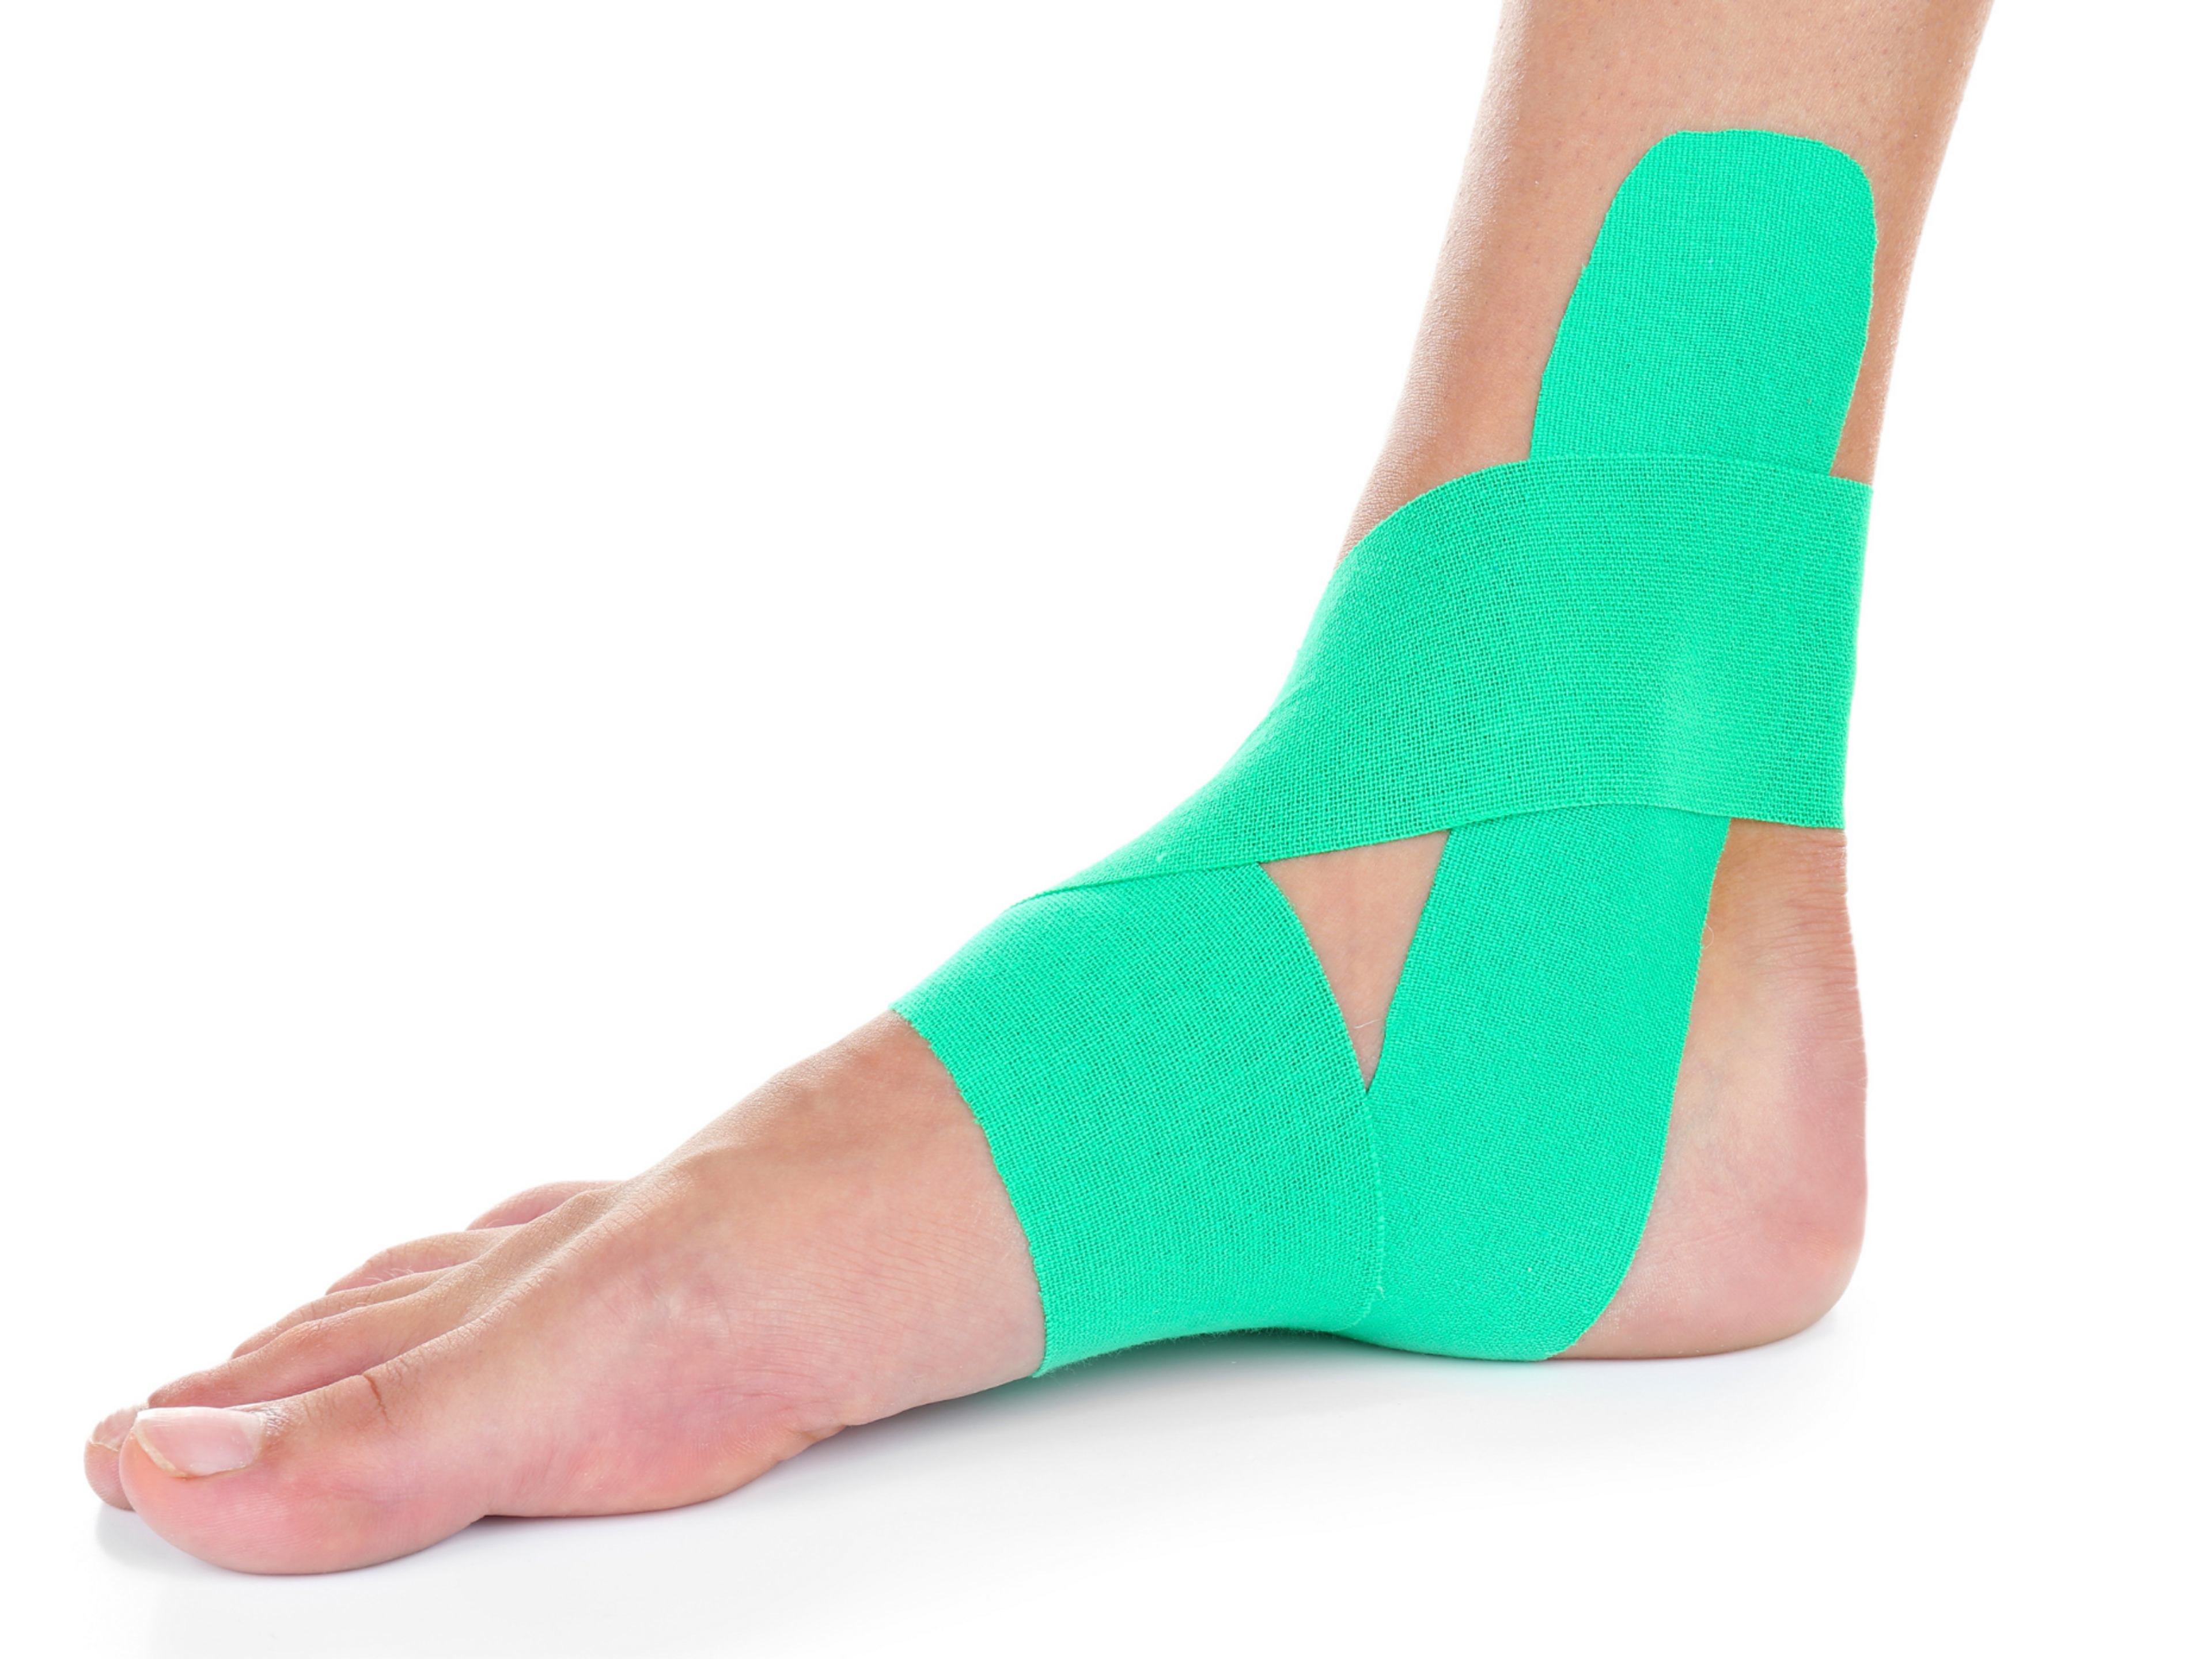 Example of K-tape for ankle sprain.